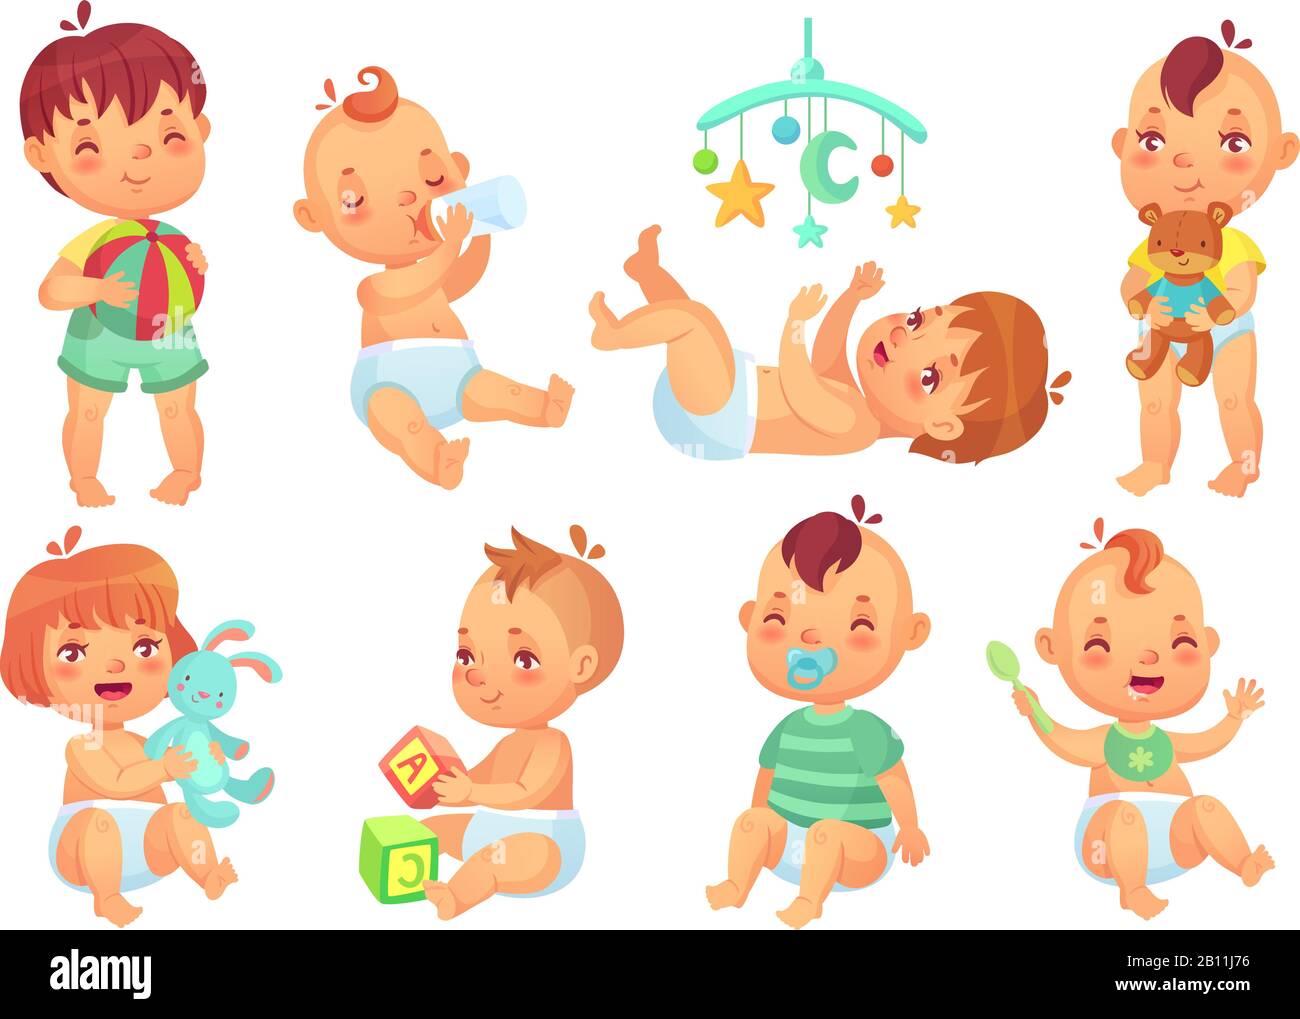 Infant baby boy playing Stock Vector Images - Alamy